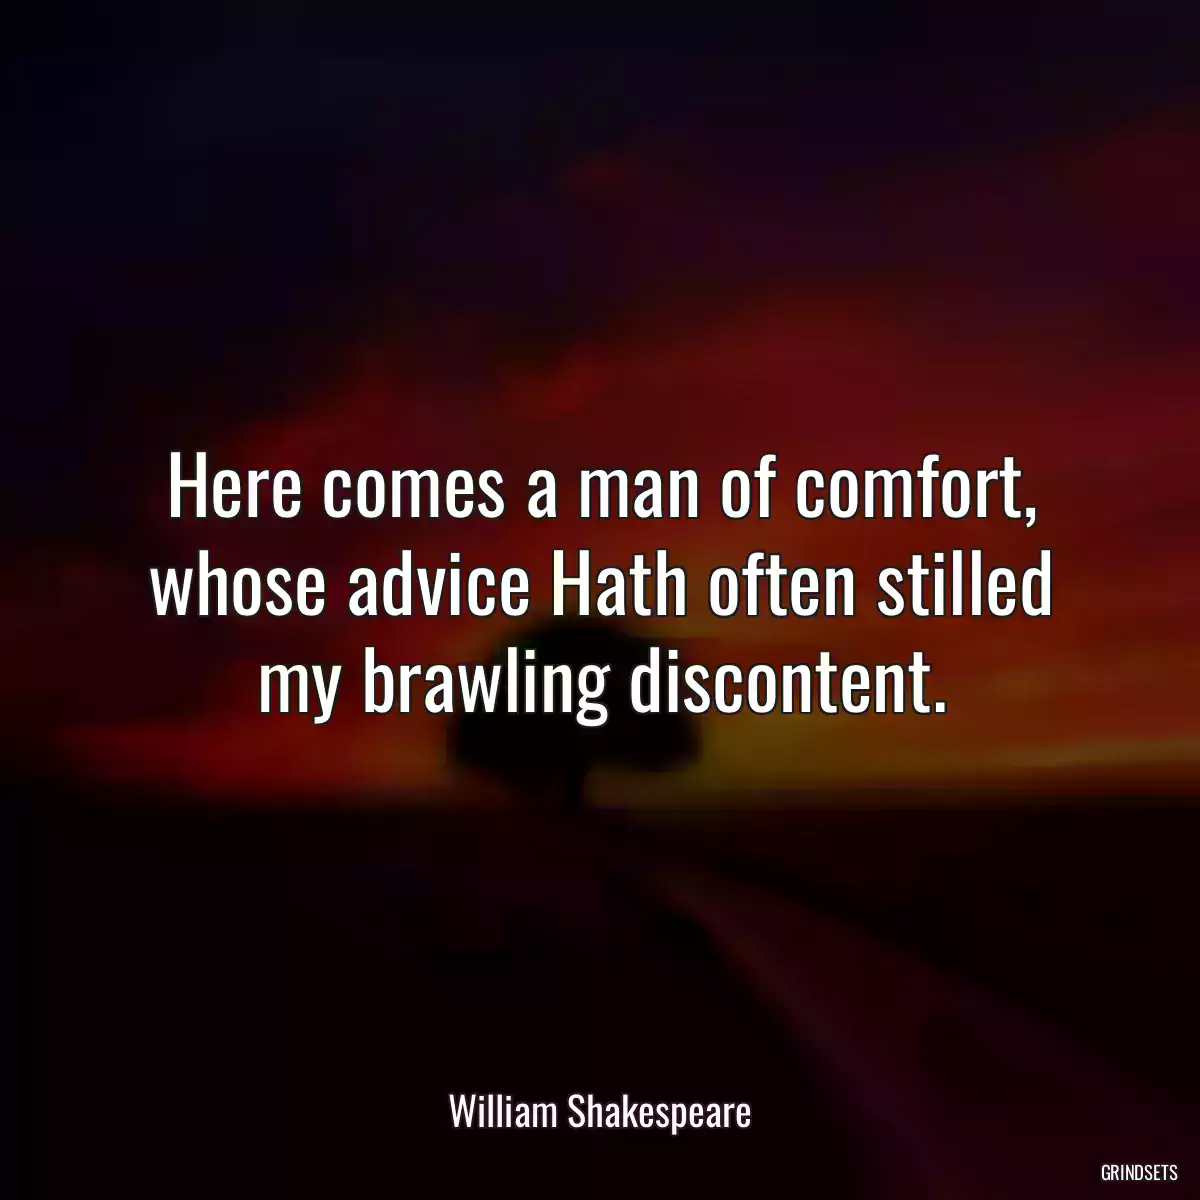 Here comes a man of comfort, whose advice Hath often stilled my brawling discontent.